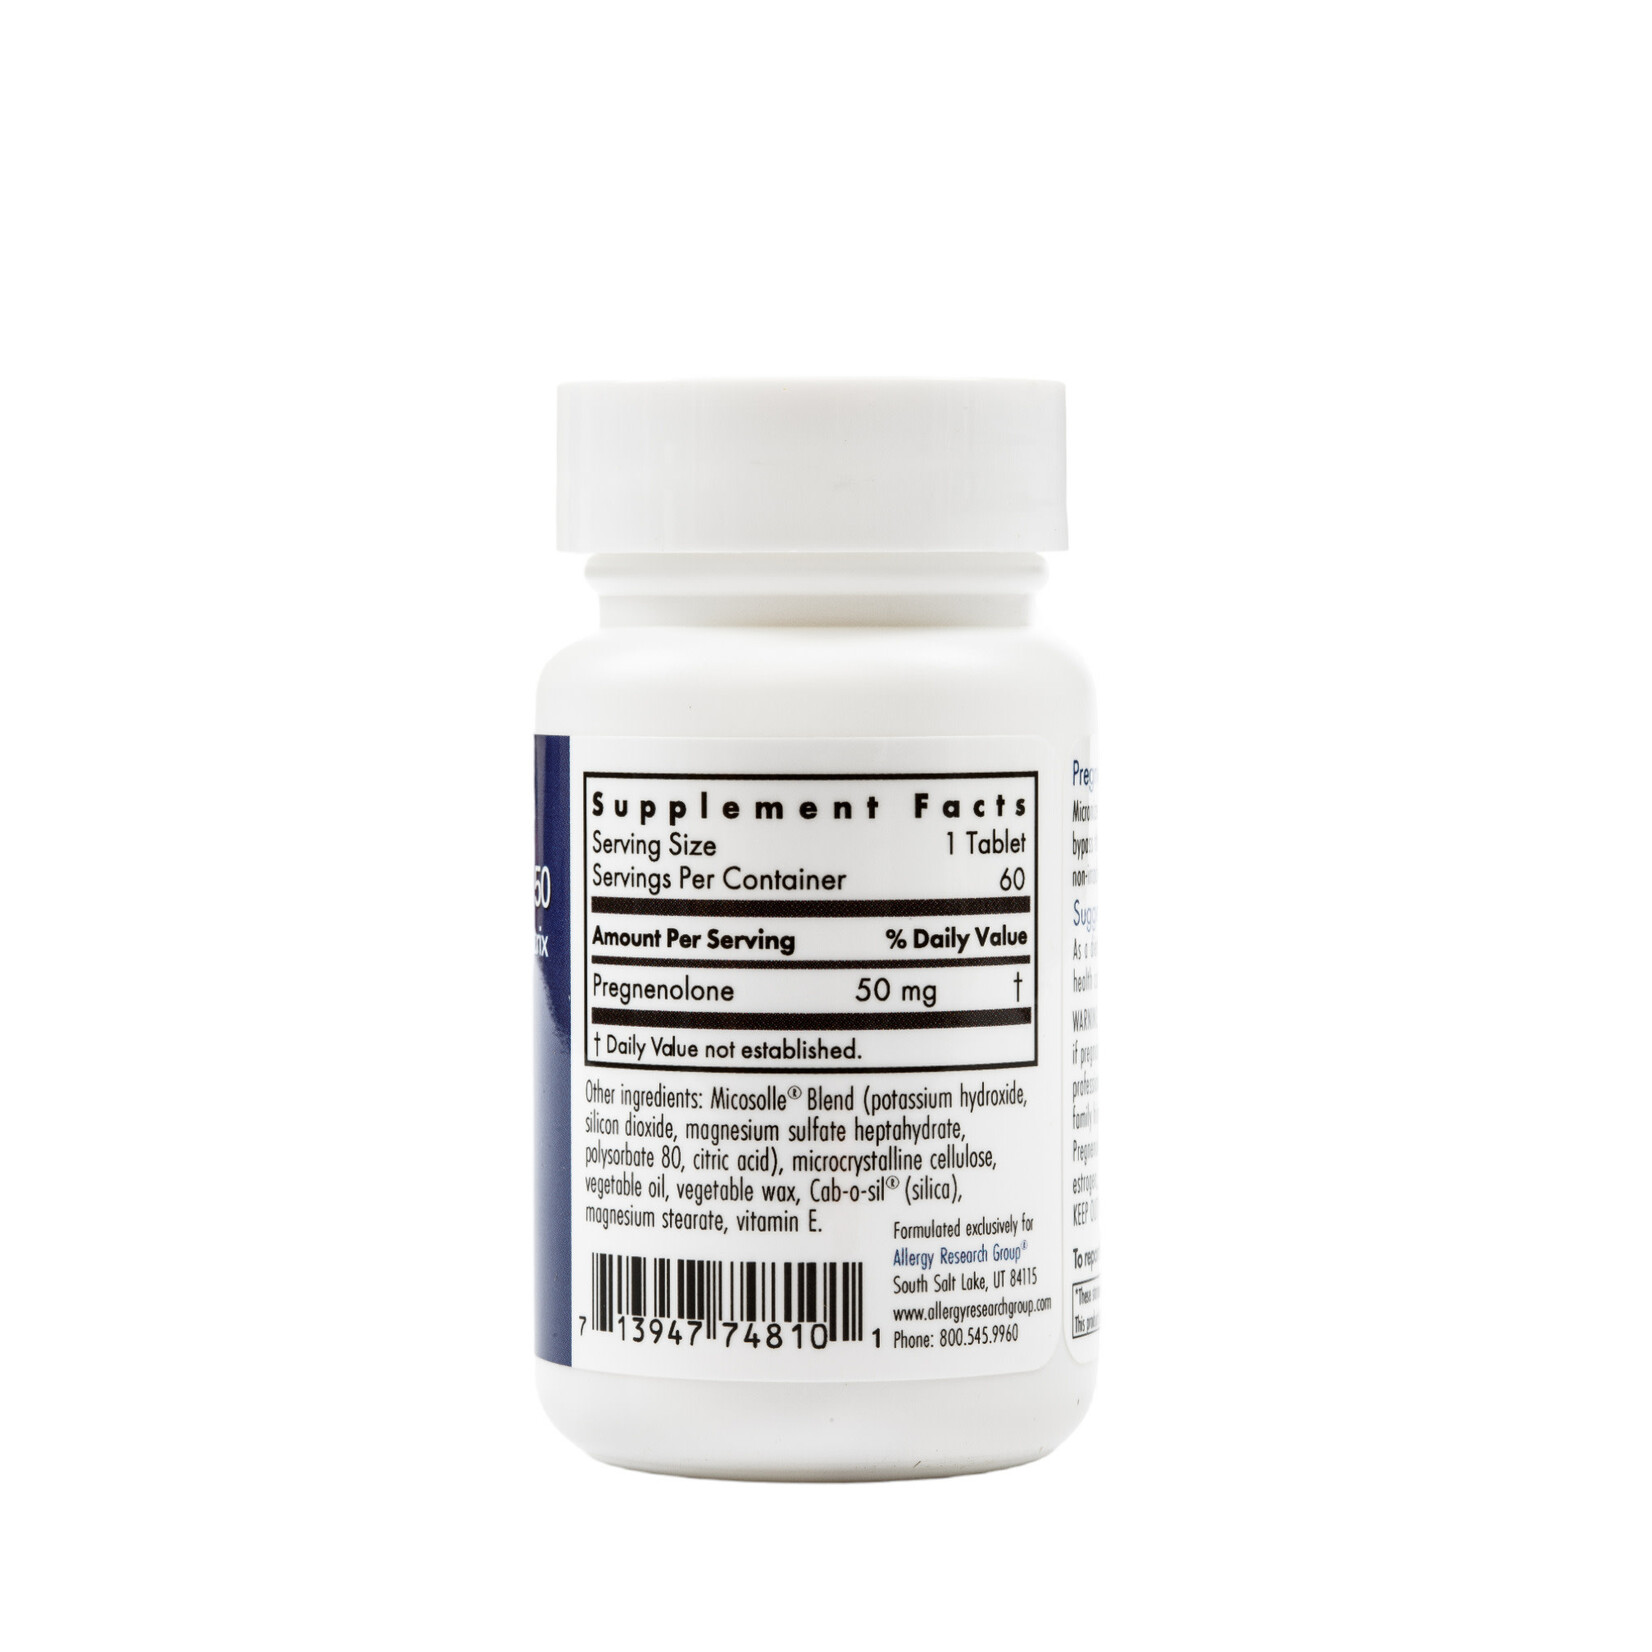 Allergy Research Group Pregnenolone 50mg 60c Allergy Research Group